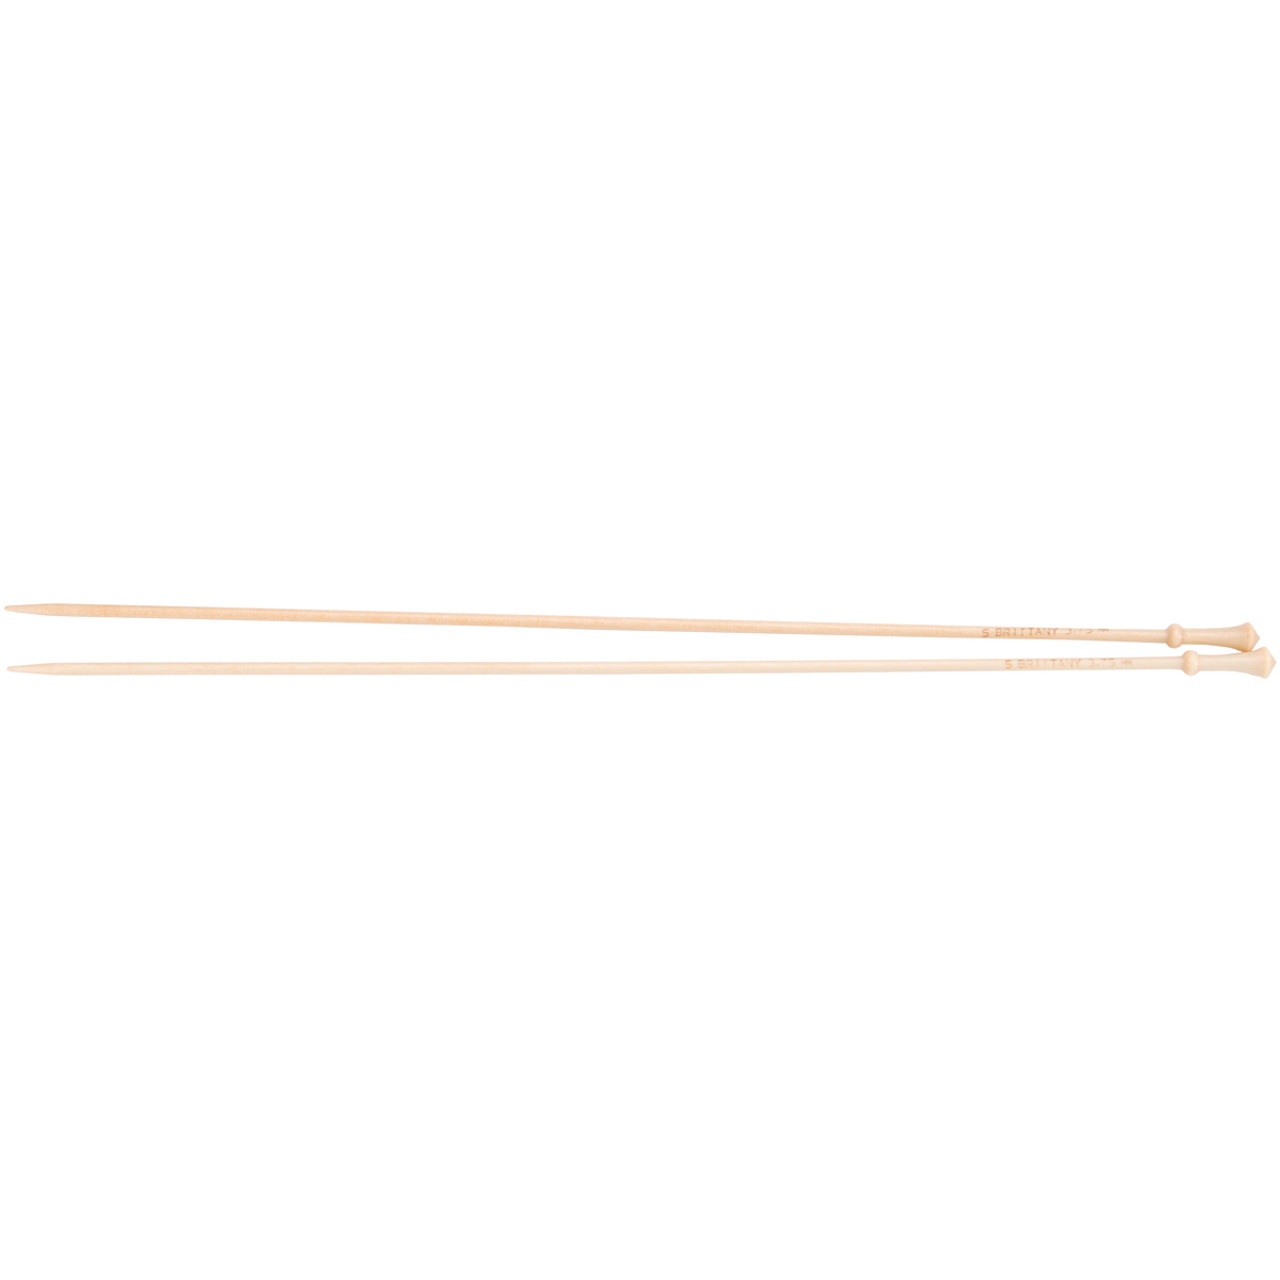 Brittany Single Point Knitting Needles 10 Size 9/5.5mm